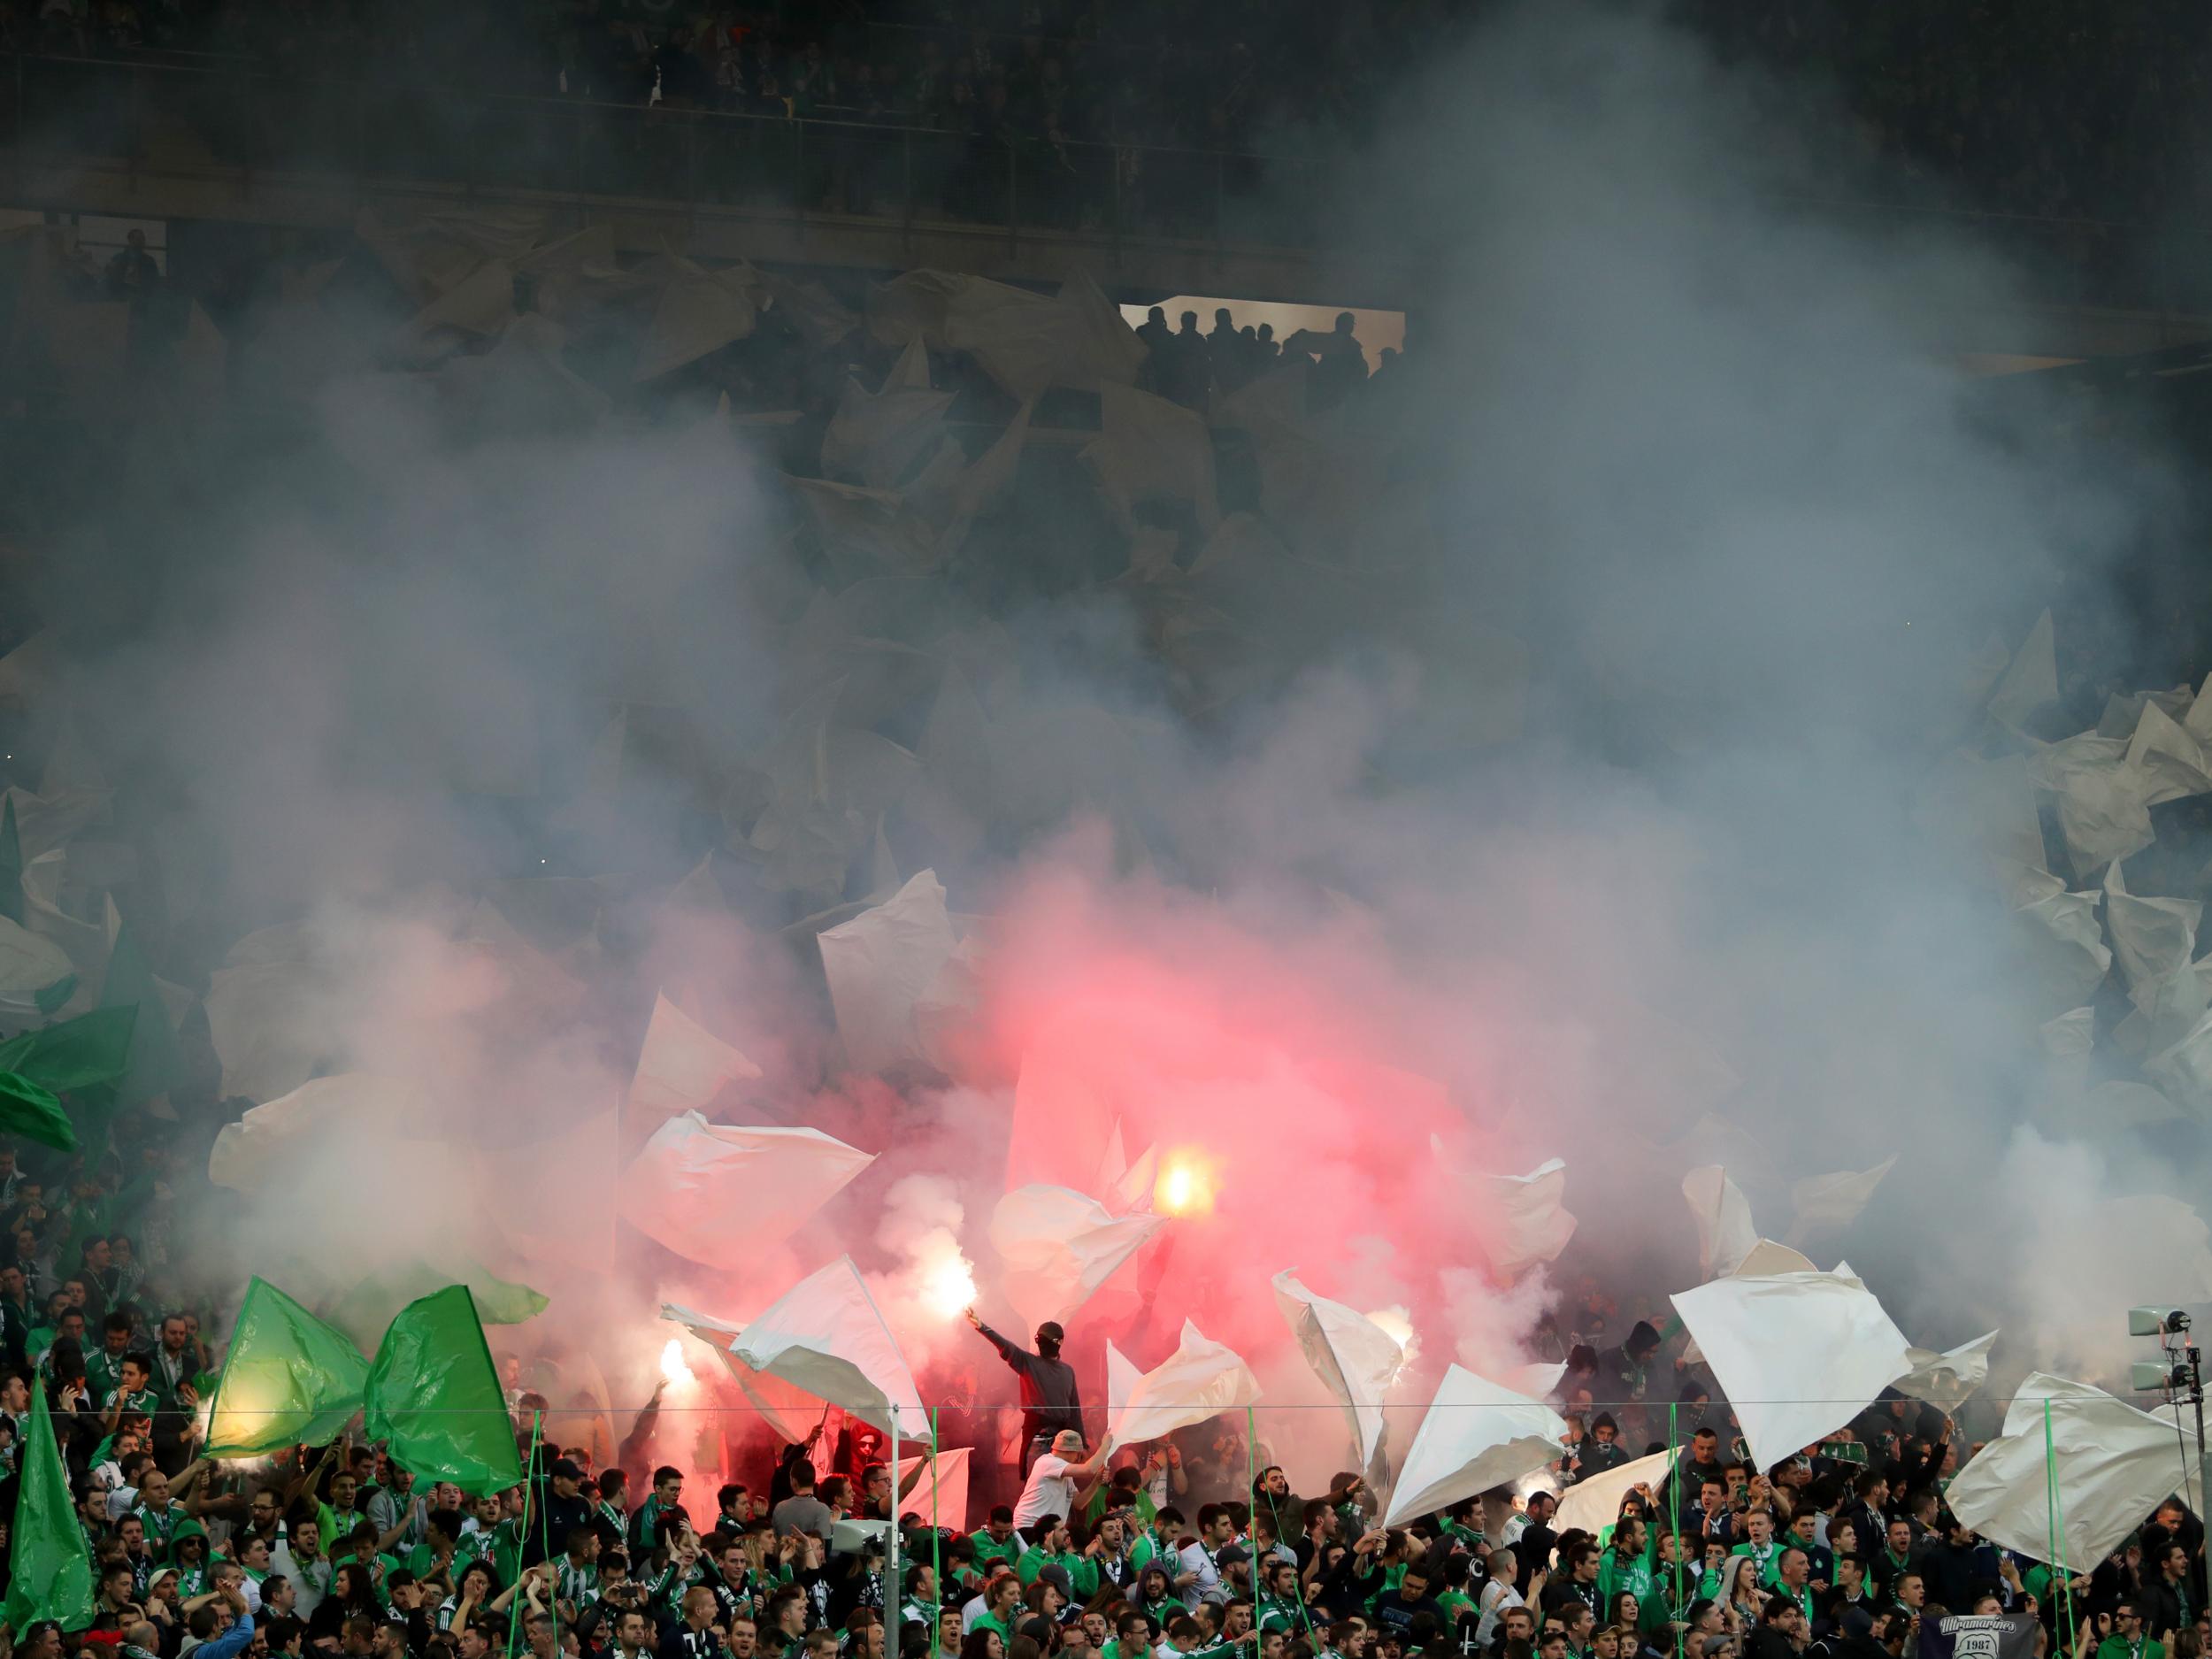 There was a raucous atmosphere at the Stade Geoffroy-Guichard